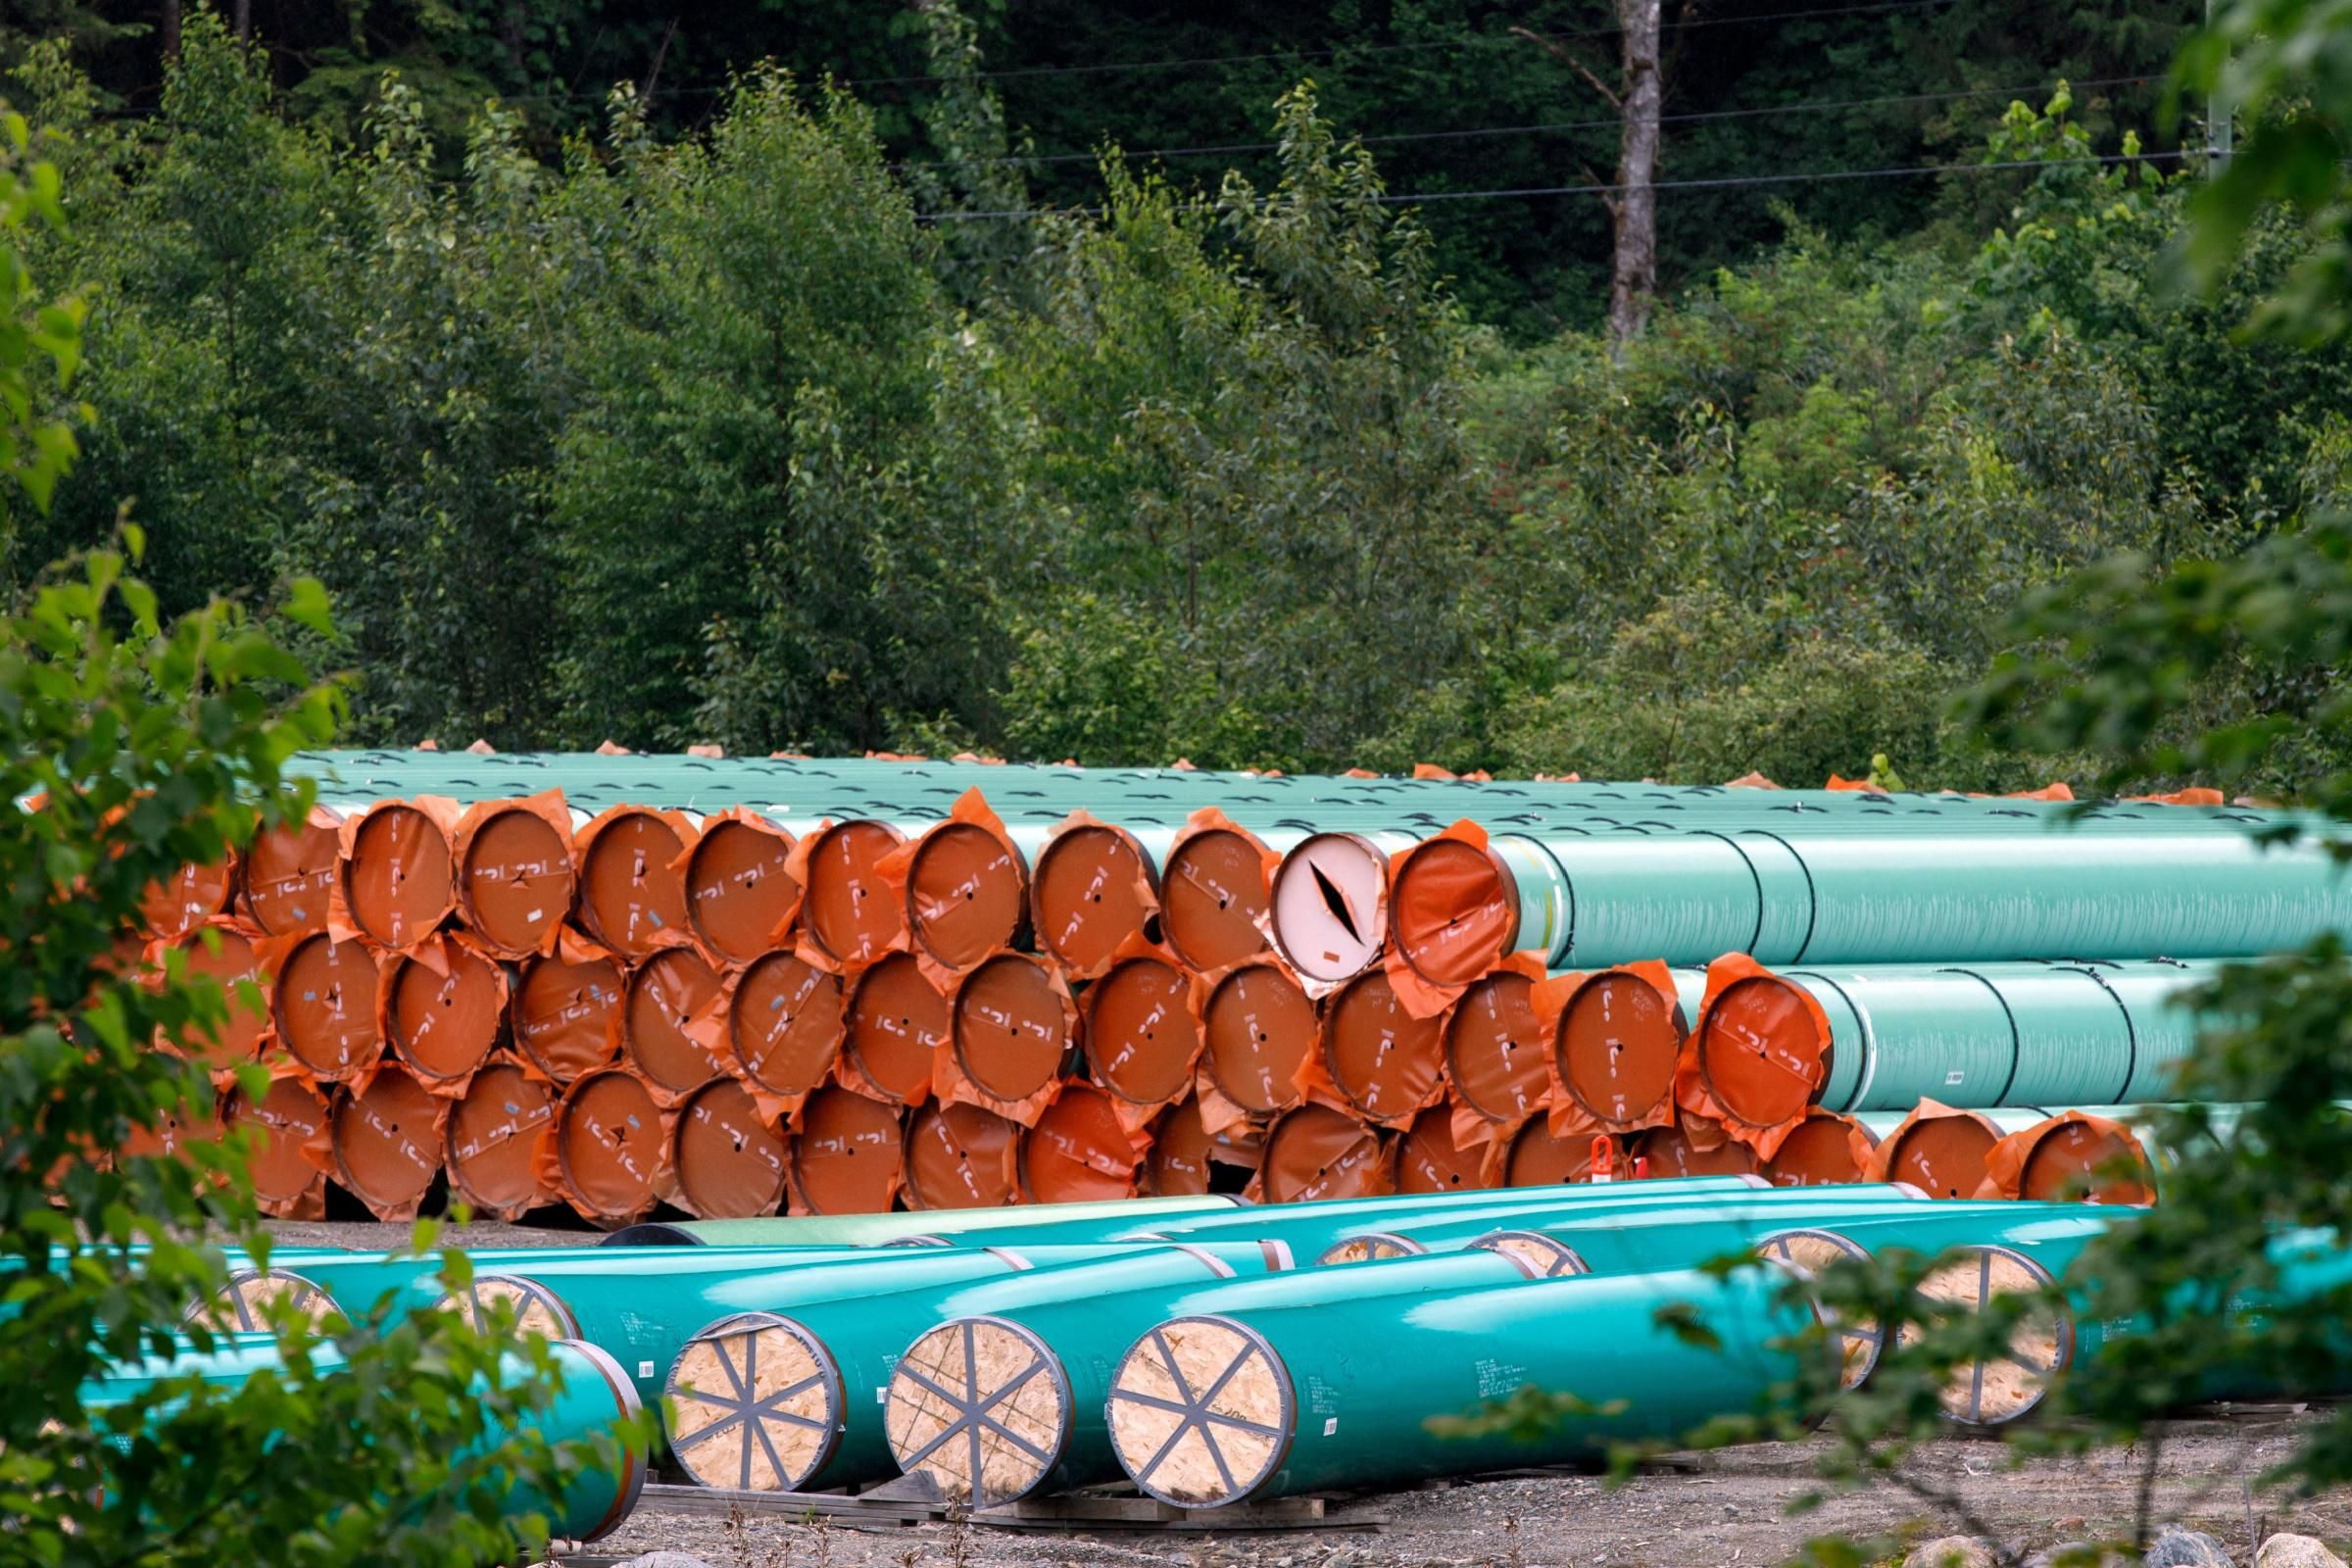 Materials for the Trans Mountain pipeline project sit in a storage lot outside British Columbia on June 6, 2021. (Photo: Cole Burston/AFP via Getty Images)